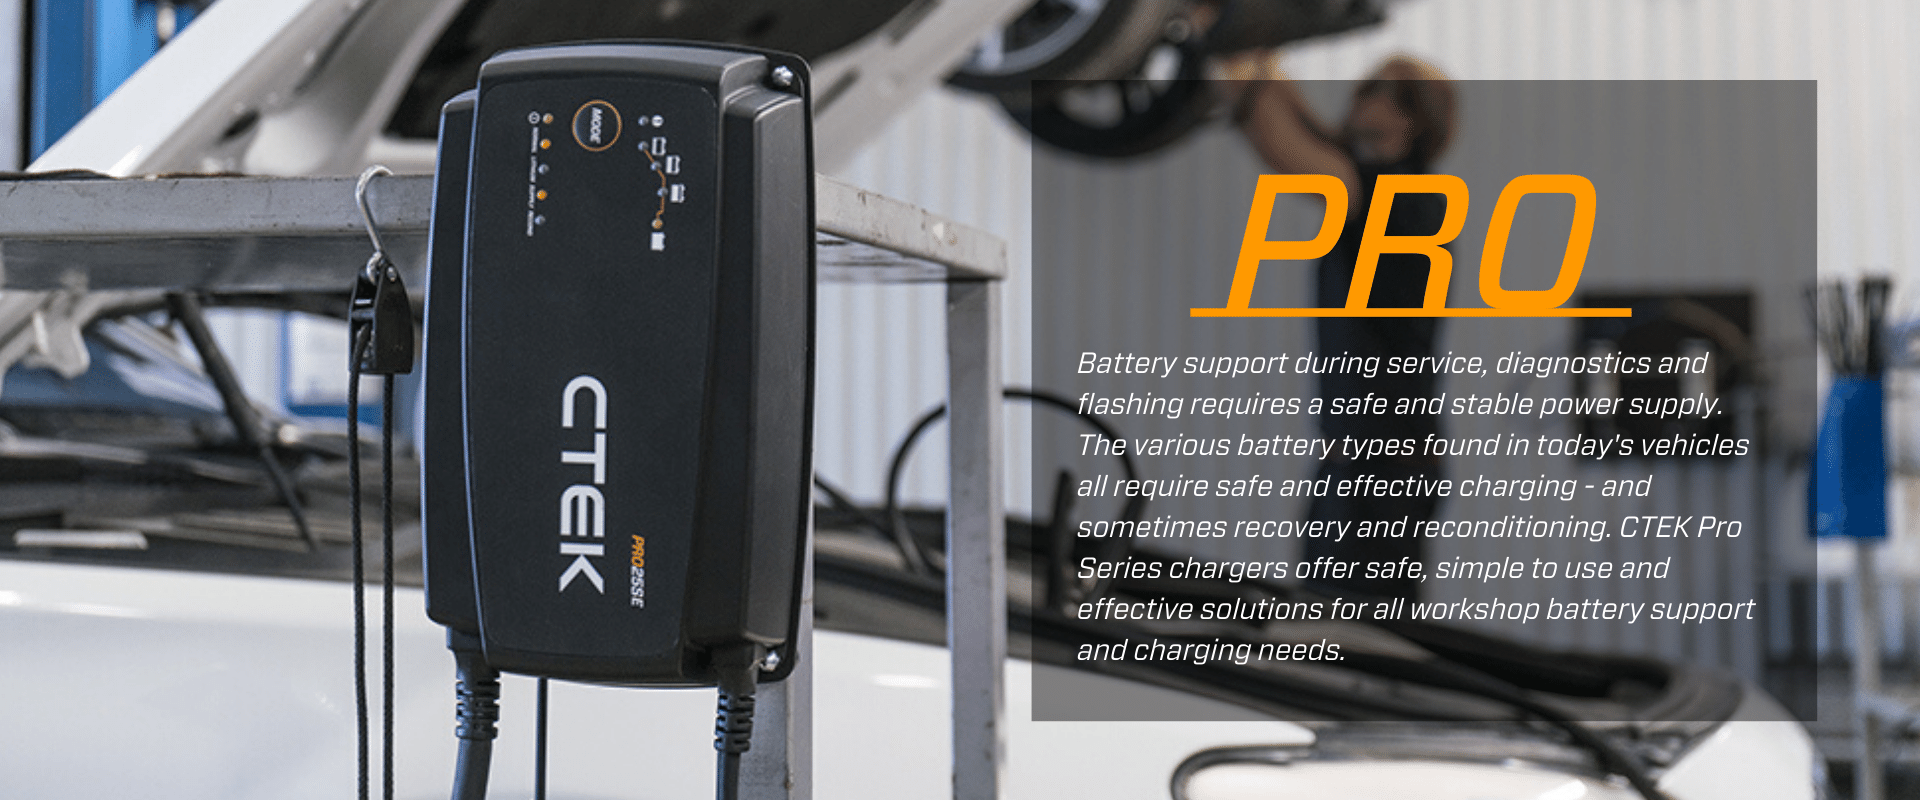 CTEK Pro Series Battery Chargers for Power Management